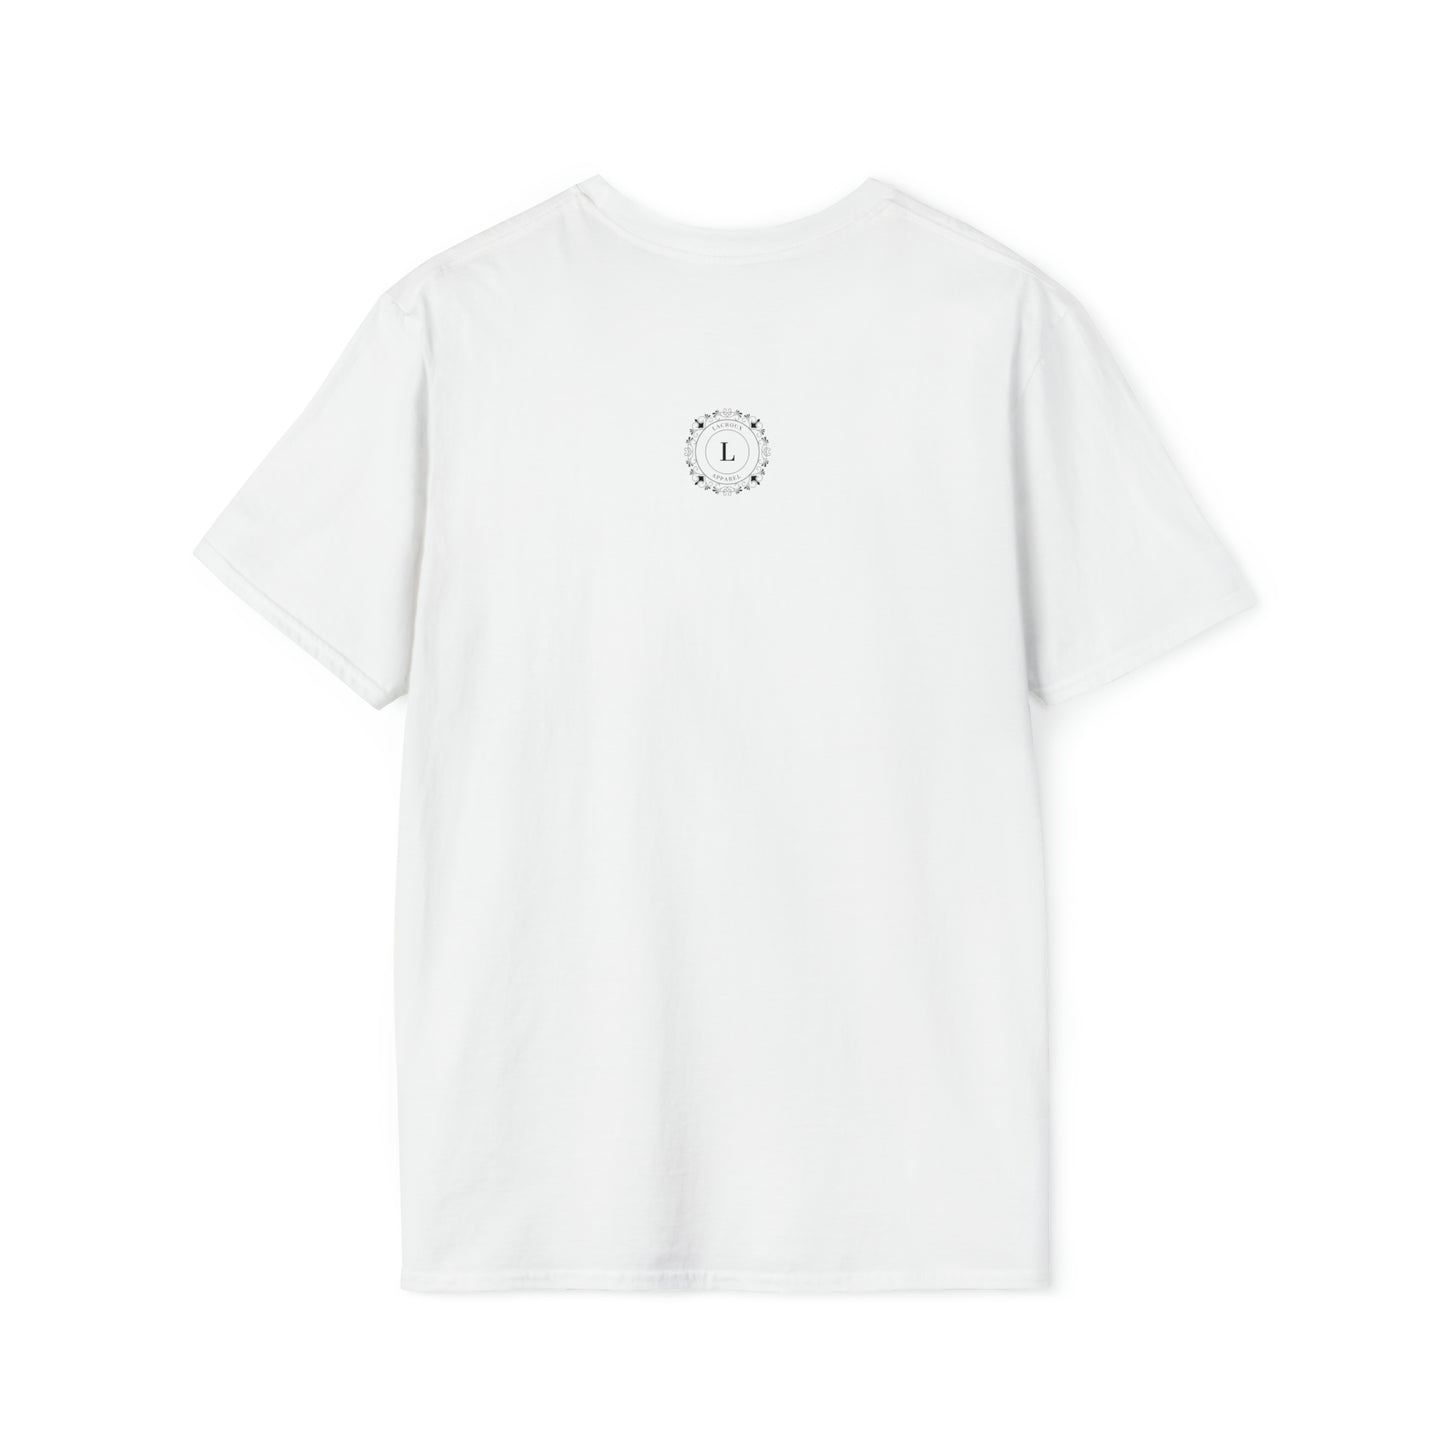 Unisex Softstyle T-Shirt Helping the Earth 02